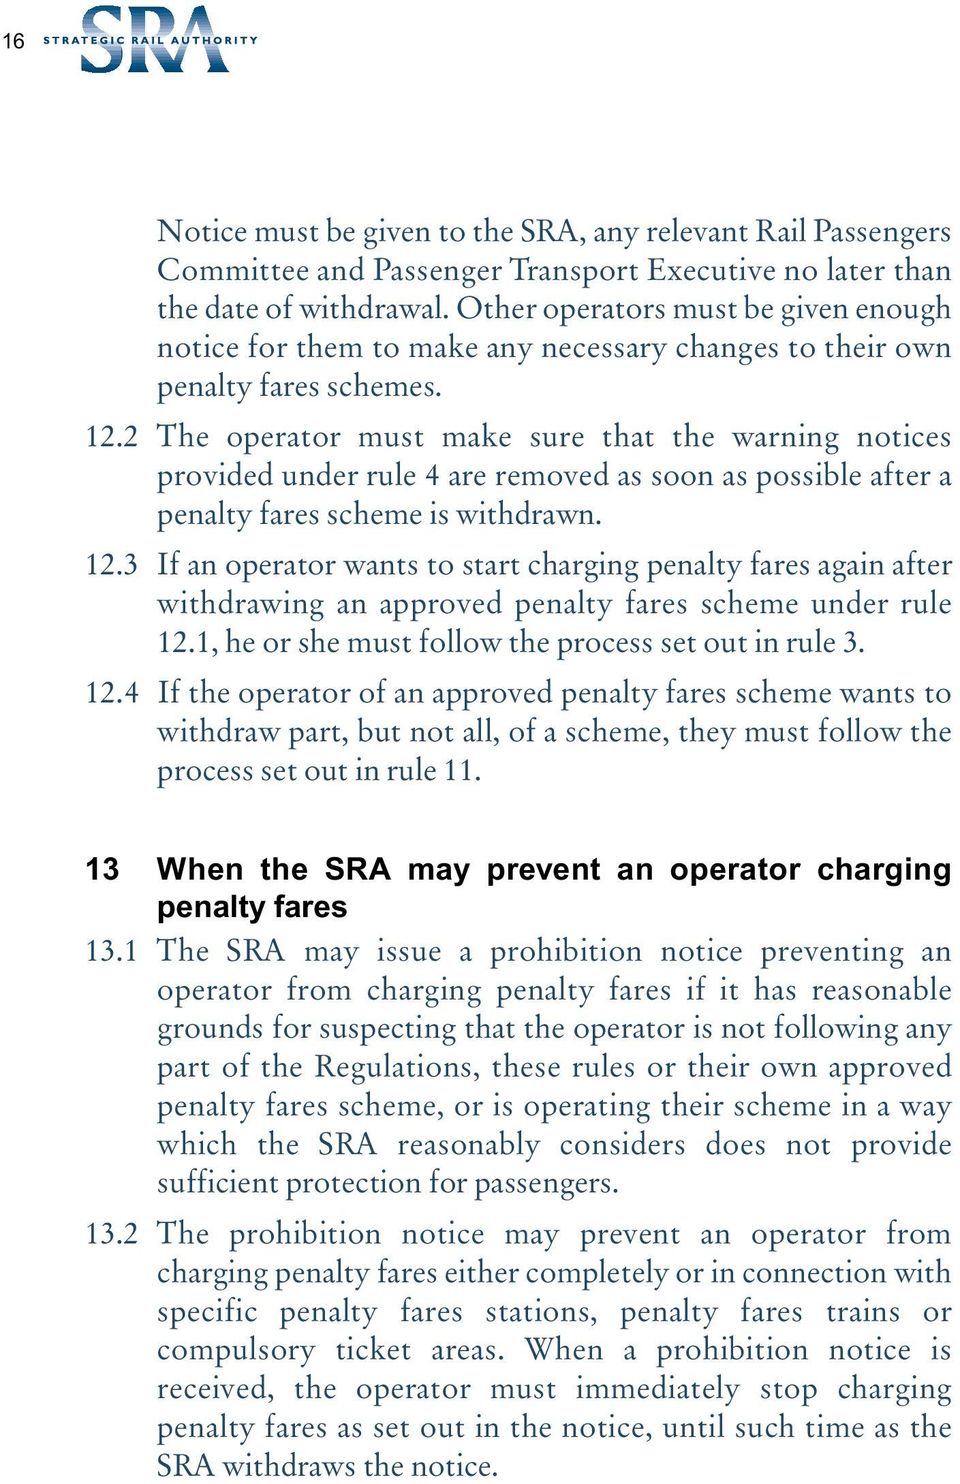 2 The operator must make sure that the warning notices provided under rule 4 are removed as soon as possible after a penalty fares scheme is withdrawn. 12.